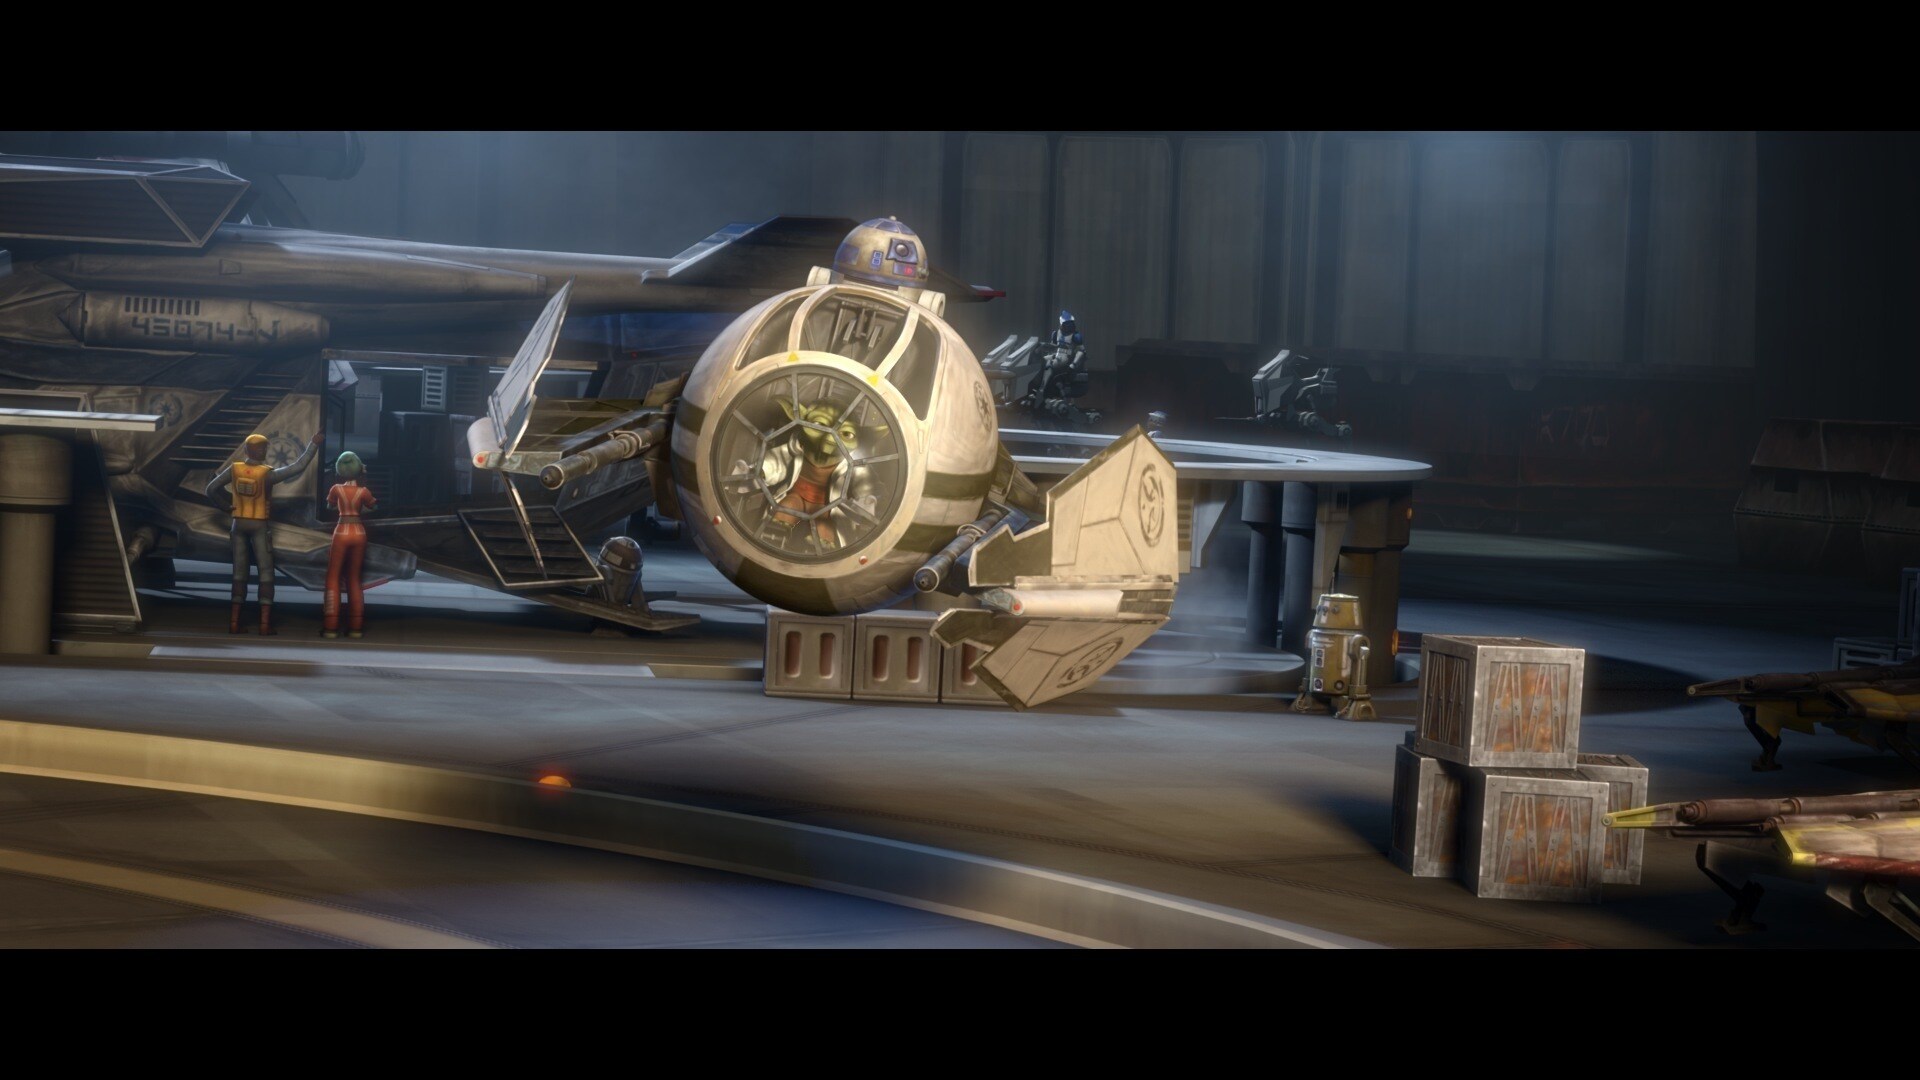 Anakin leads Yoda to the Jedi Temple hangar. He tasks R2-D2 to take Yoda to his ship and get him ...